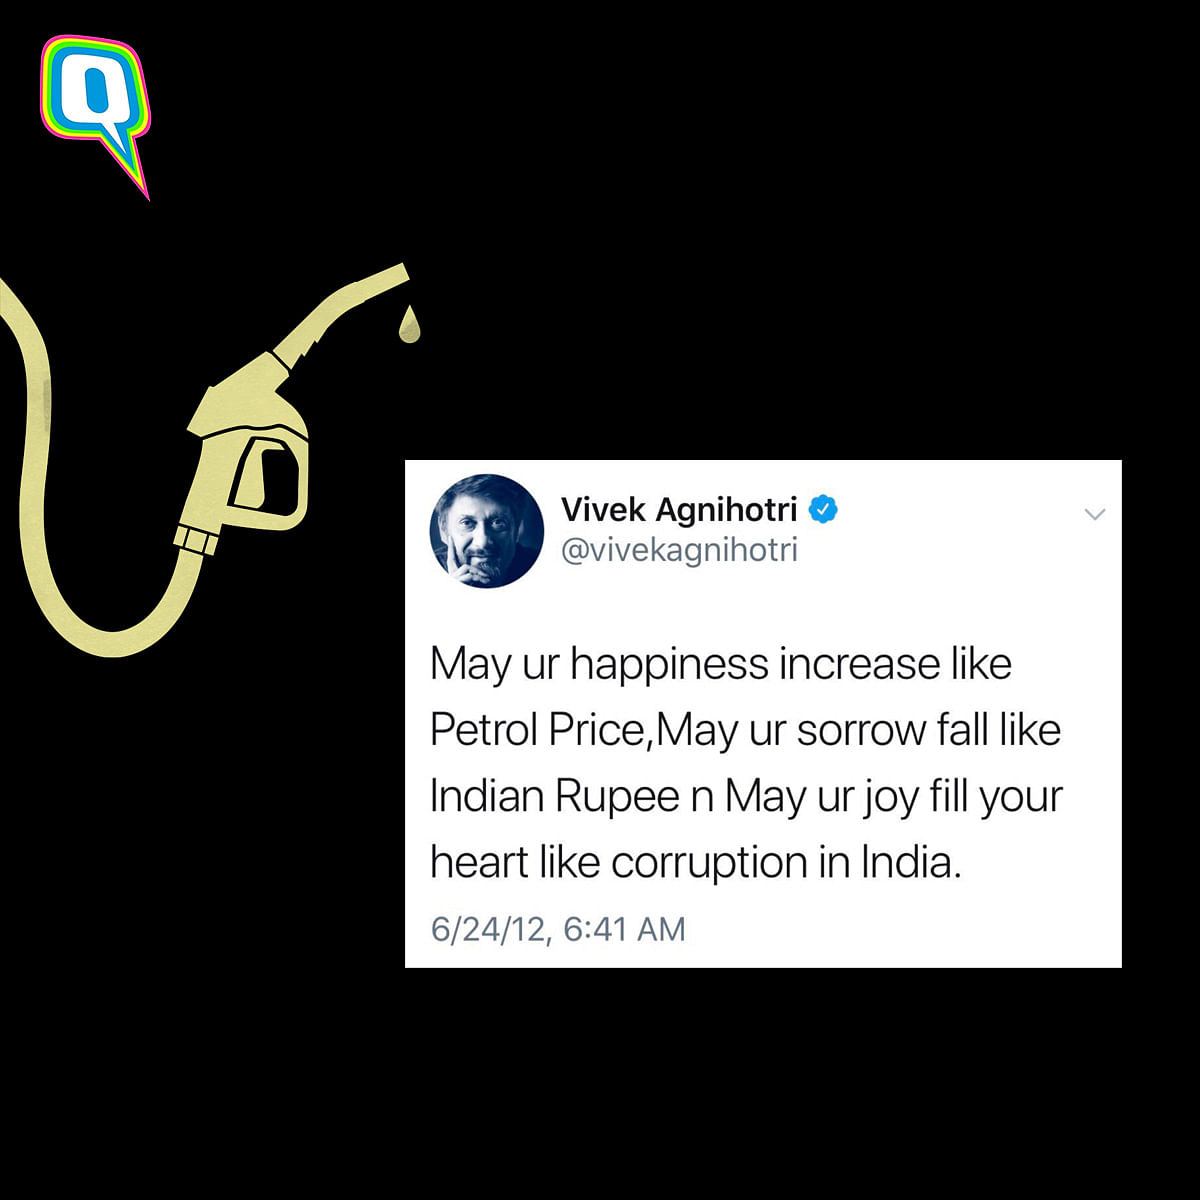 Hey celebs, where are all the jokes about fuel price hikes now?